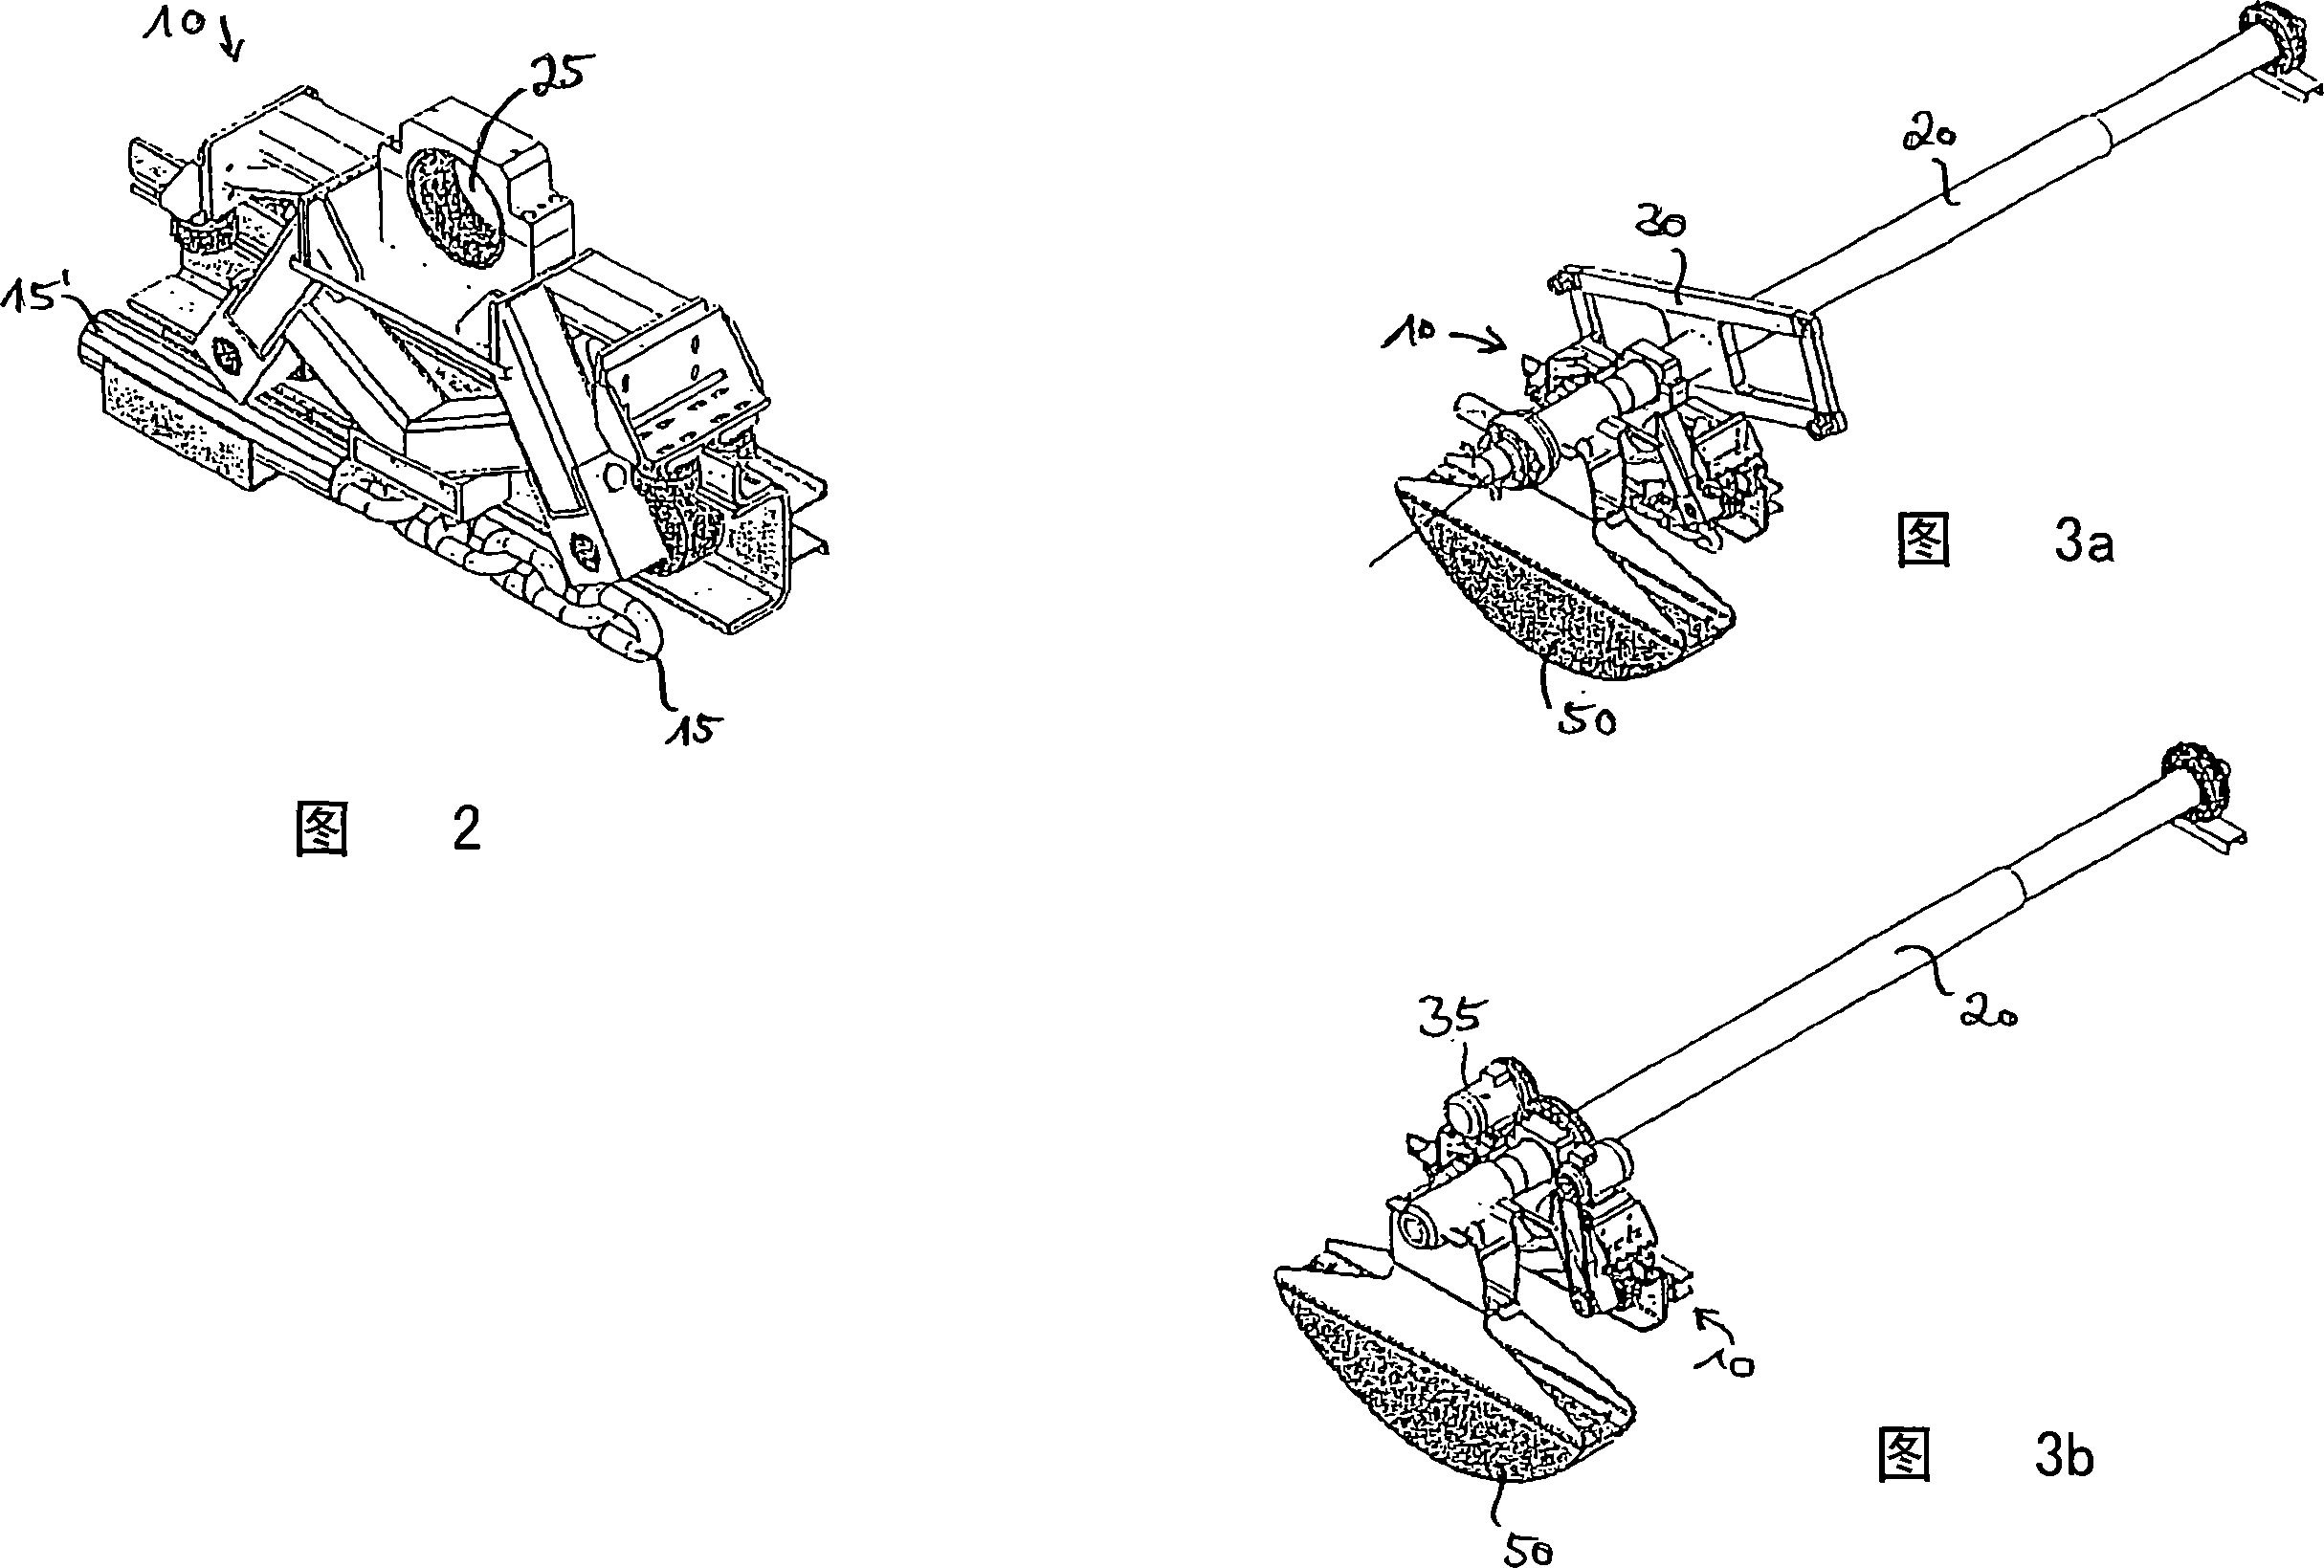 Unit and method for conveying workpieces along a processing run